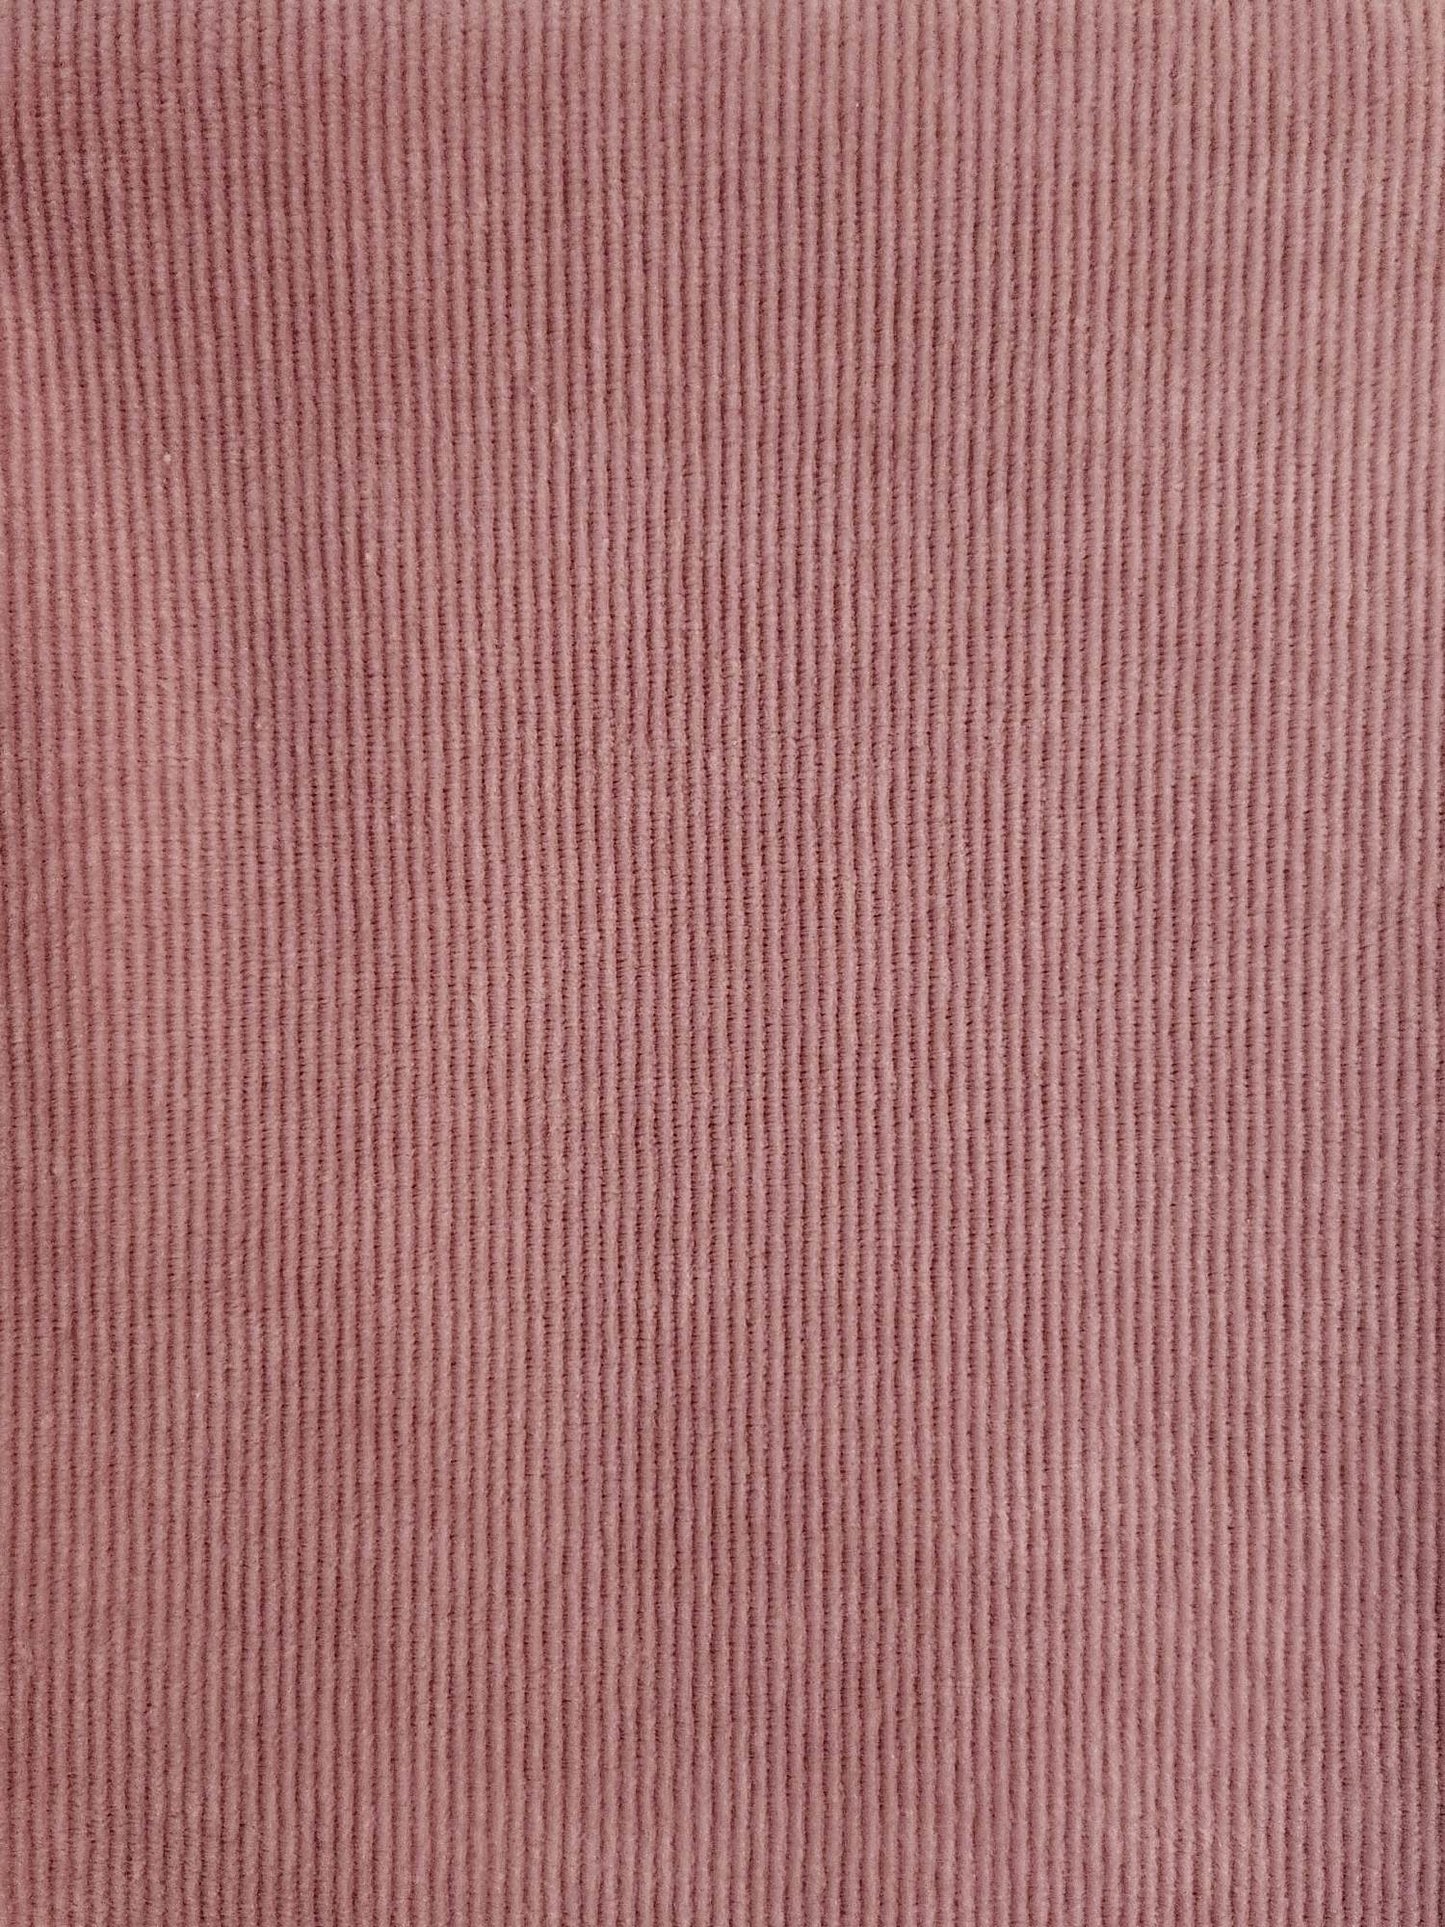 Remnant Euro Stretch Jersey Corduroy - Rose**80cm**